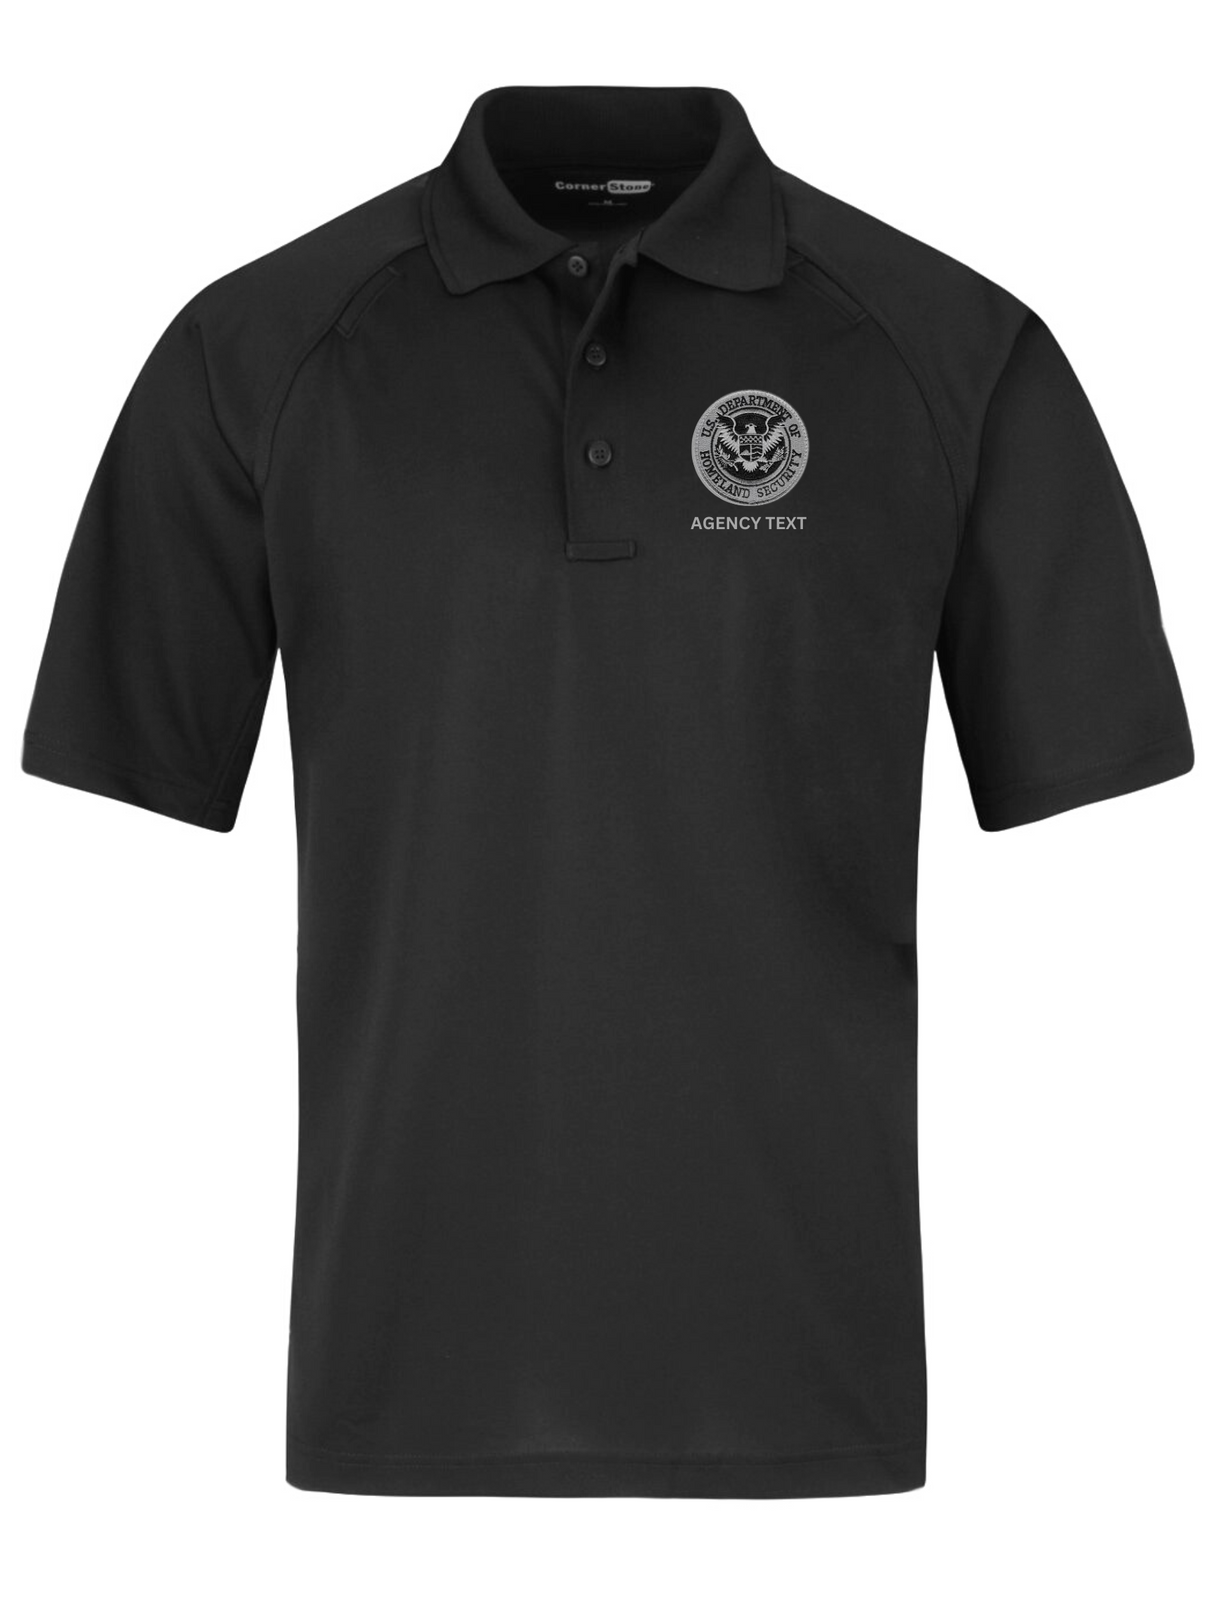 TACTICAL (Ghost Effect) Dept of Homeland Security Polo- Men's Short Sleeve - FEDS Apparel